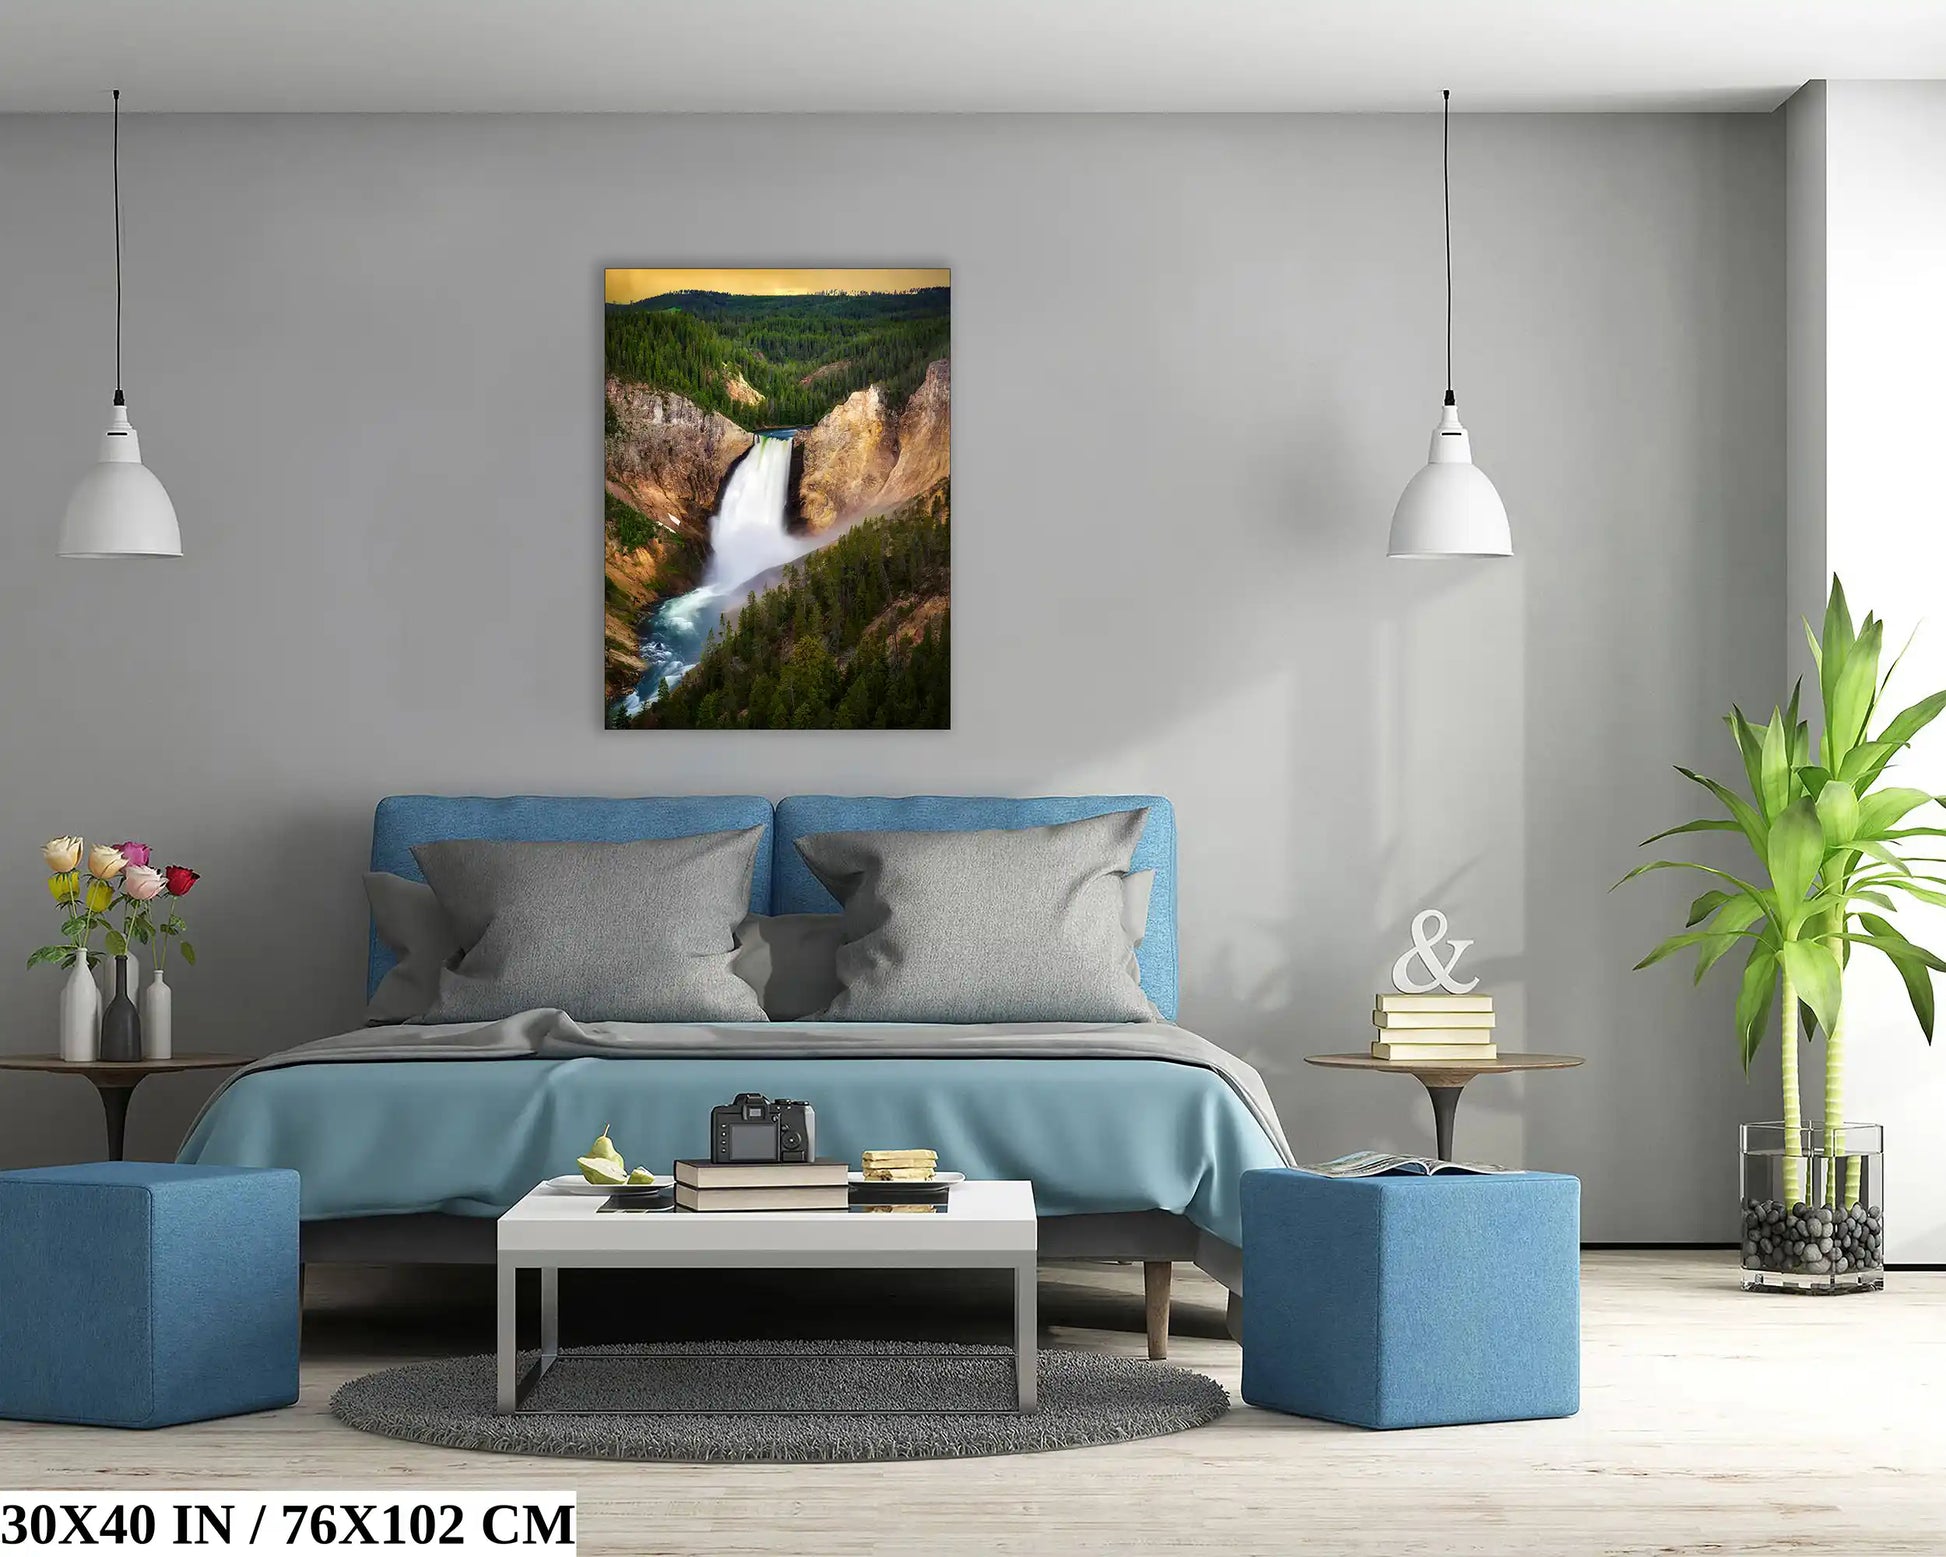 A 30x40 inch canvas print of Lower Yellowstone Falls at sunset in a bedroom setting, creating a serene wall feature.